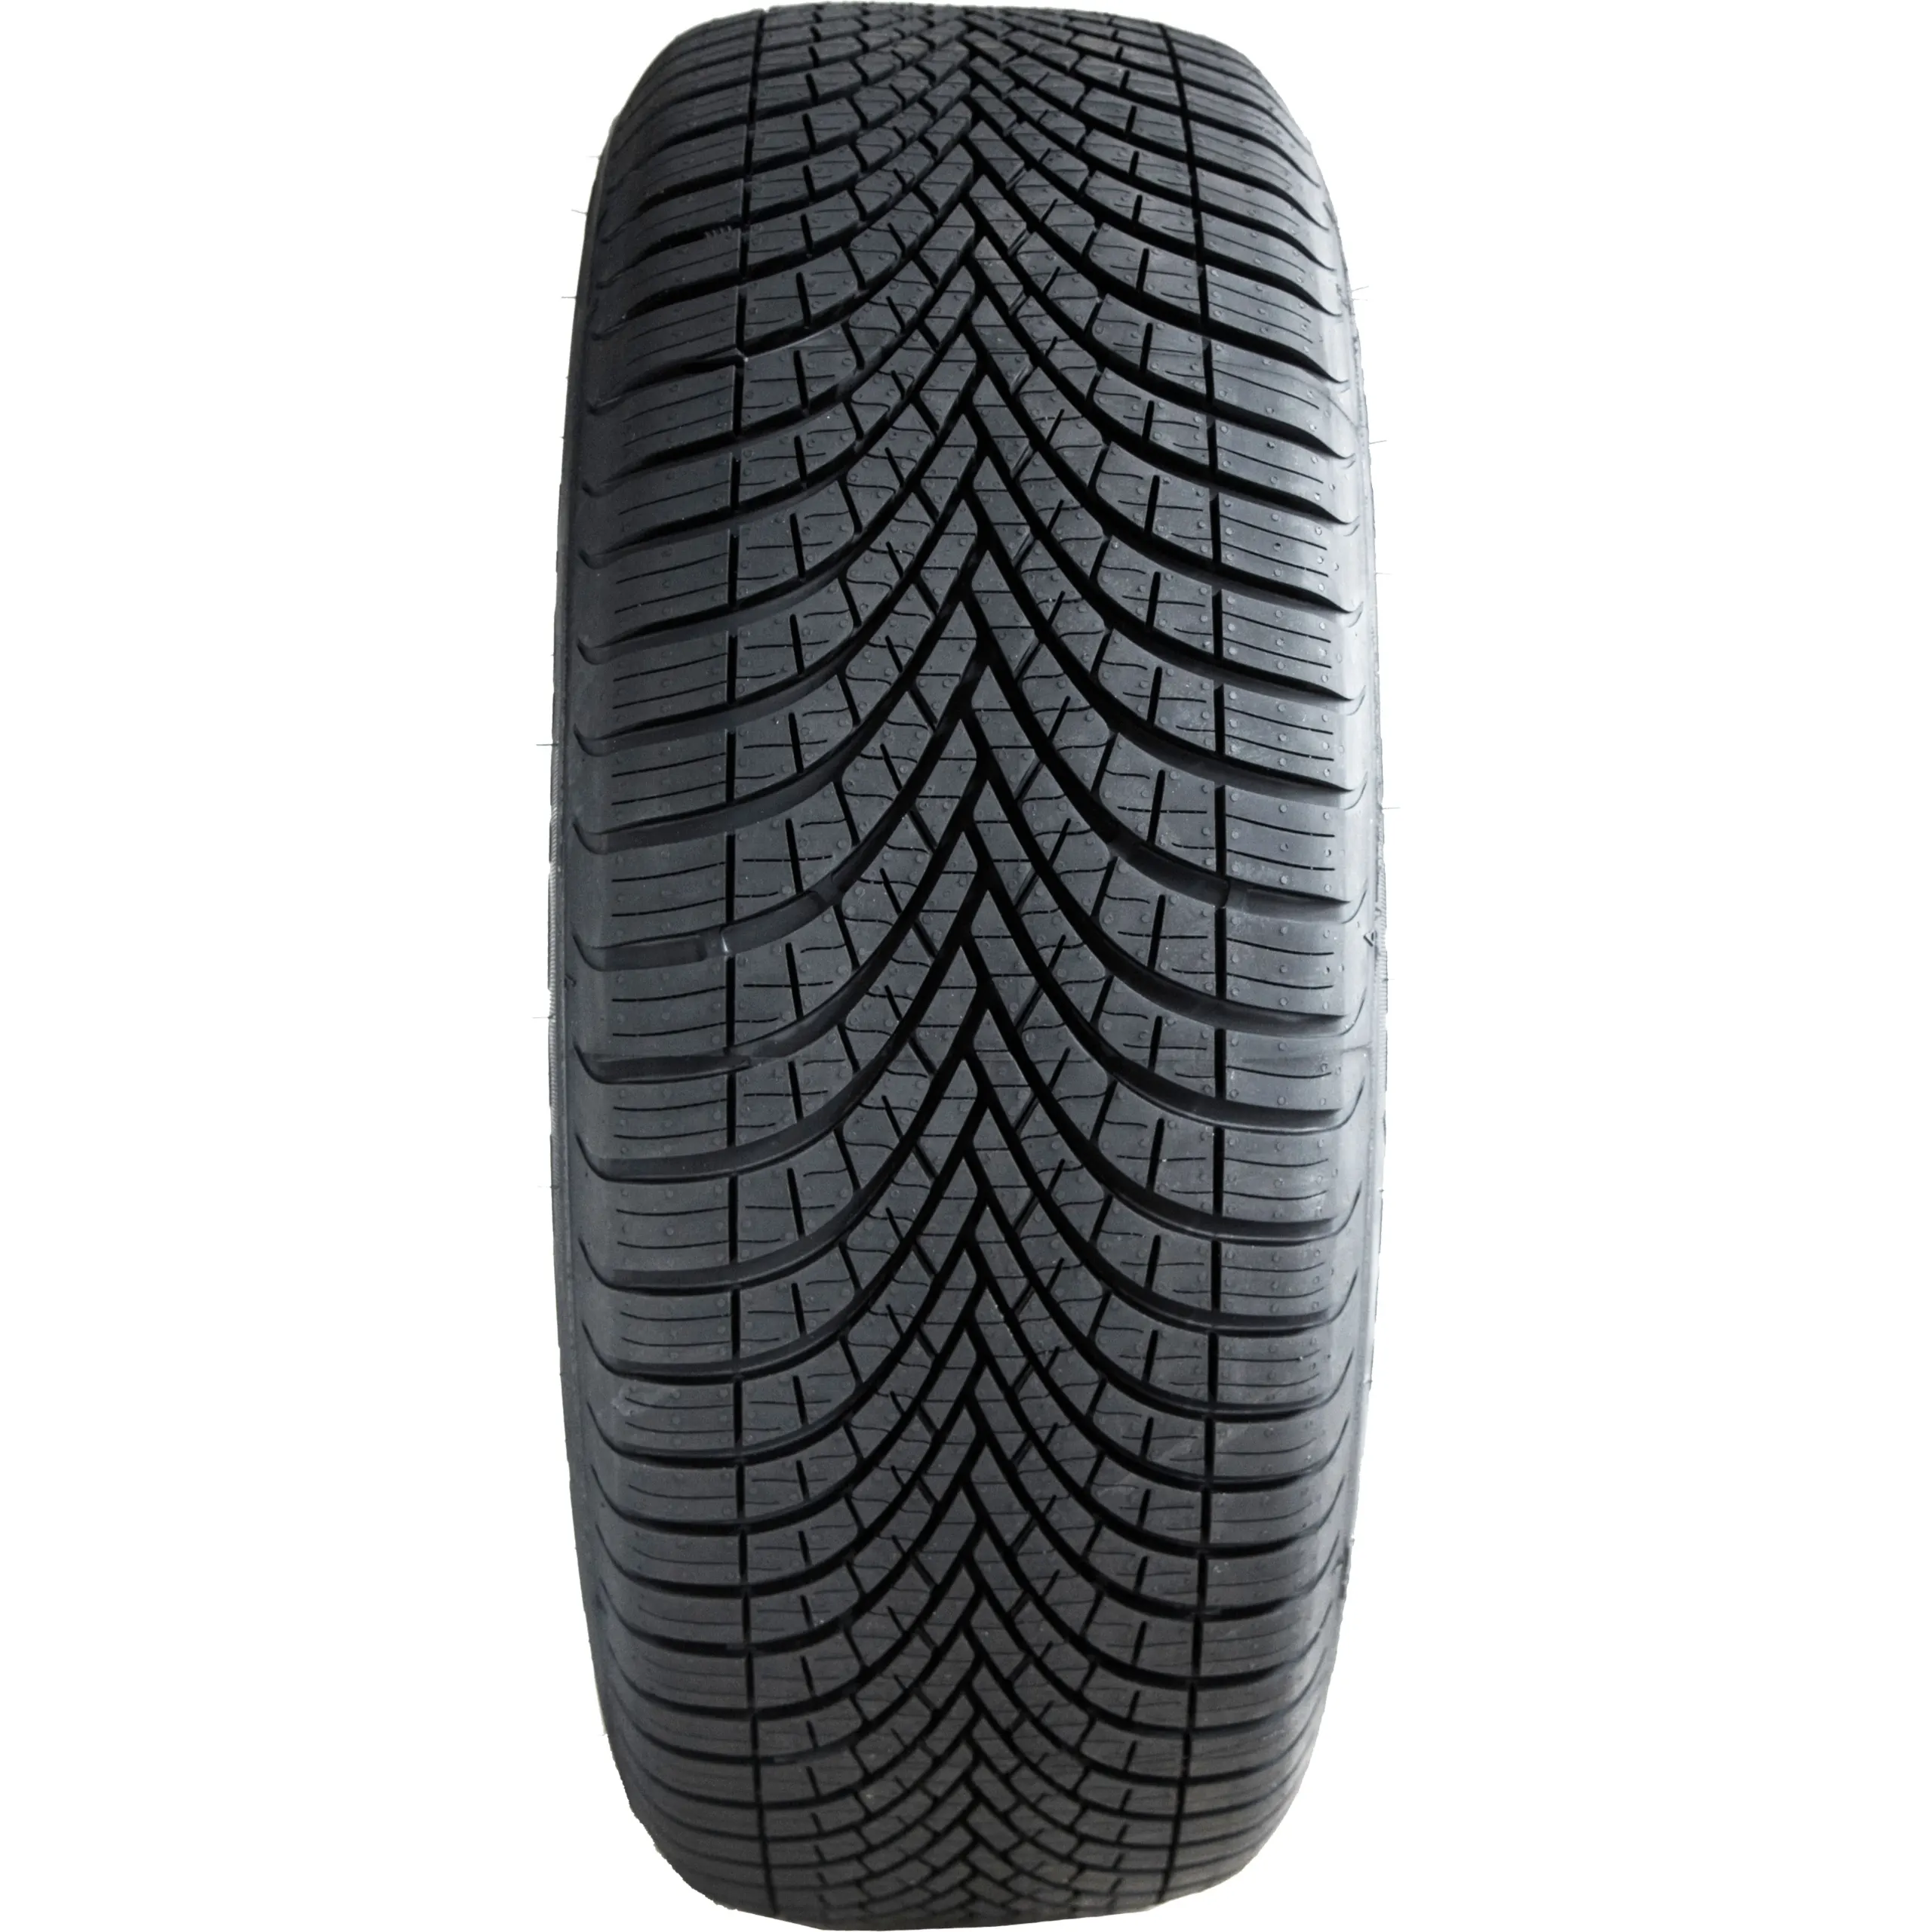 New Used Car Tyres For Sale tires and accessories 225/60R16 used tires for resale wholesale